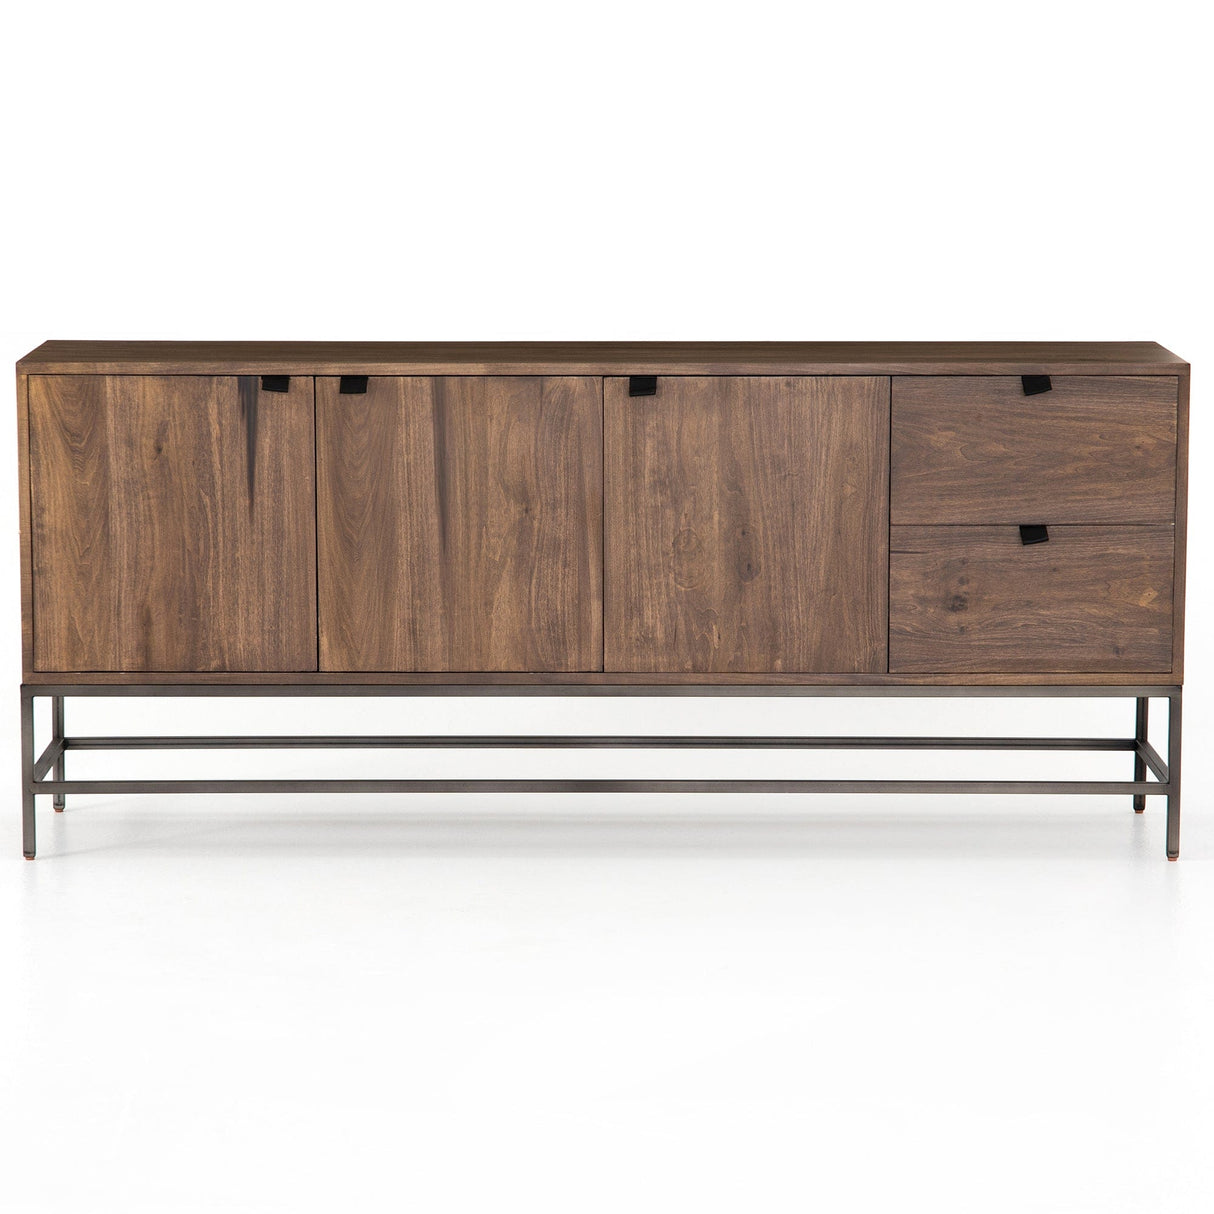 Four Hands Trey Sideboard Furniture four-hands-UFUL-037 801542507374